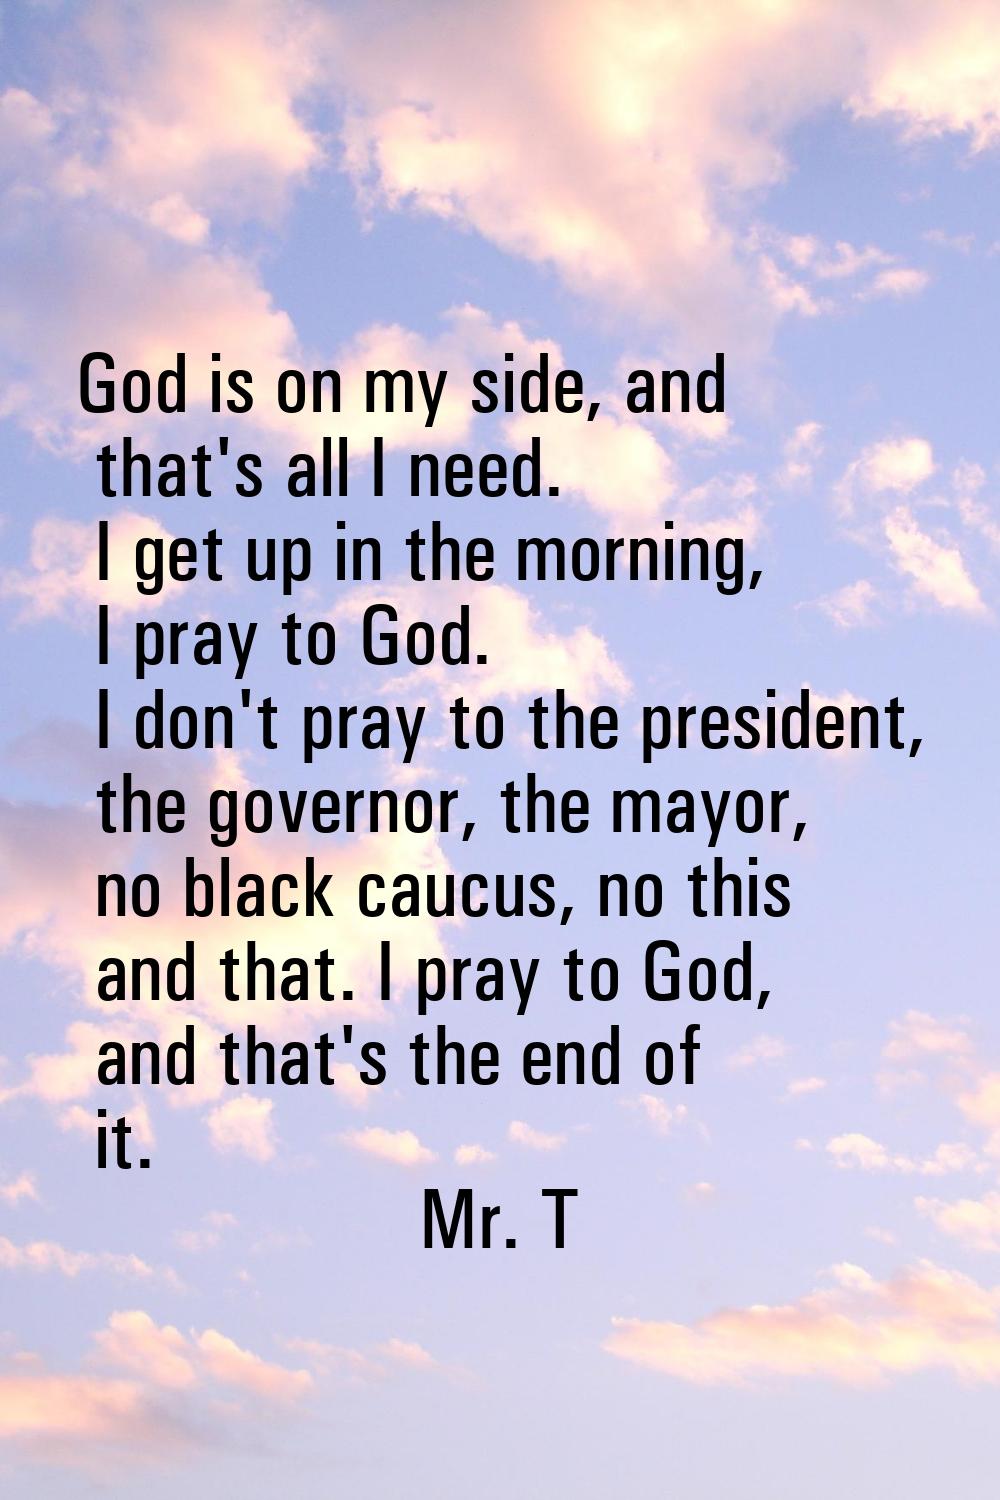 God is on my side, and that's all I need. I get up in the morning, I pray to God. I don't pray to t